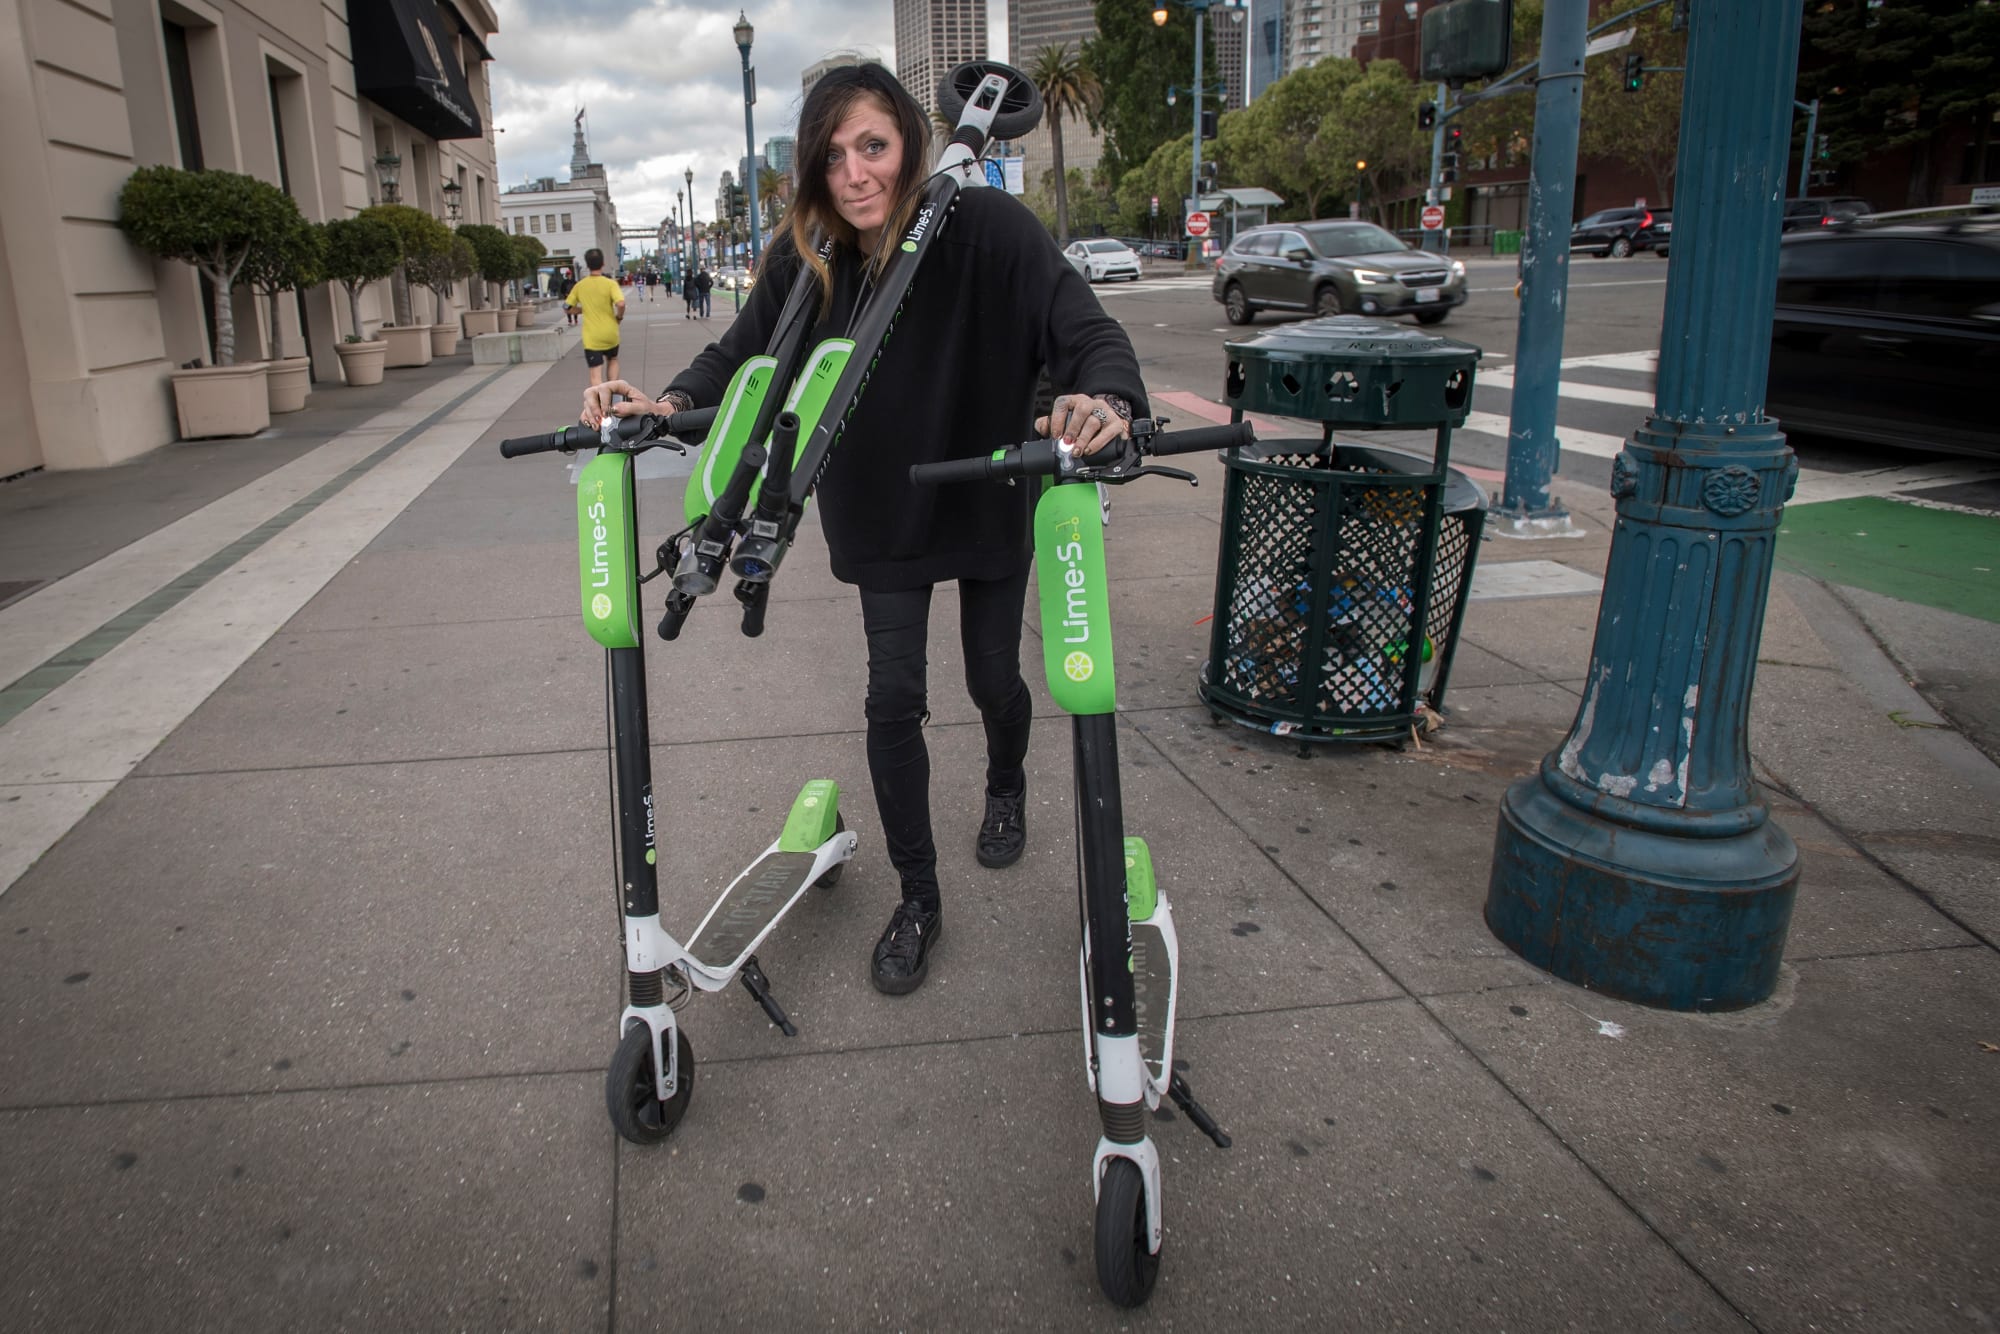 Scooter-Sharing Company LimeBike As Startups Have Started A Revolution